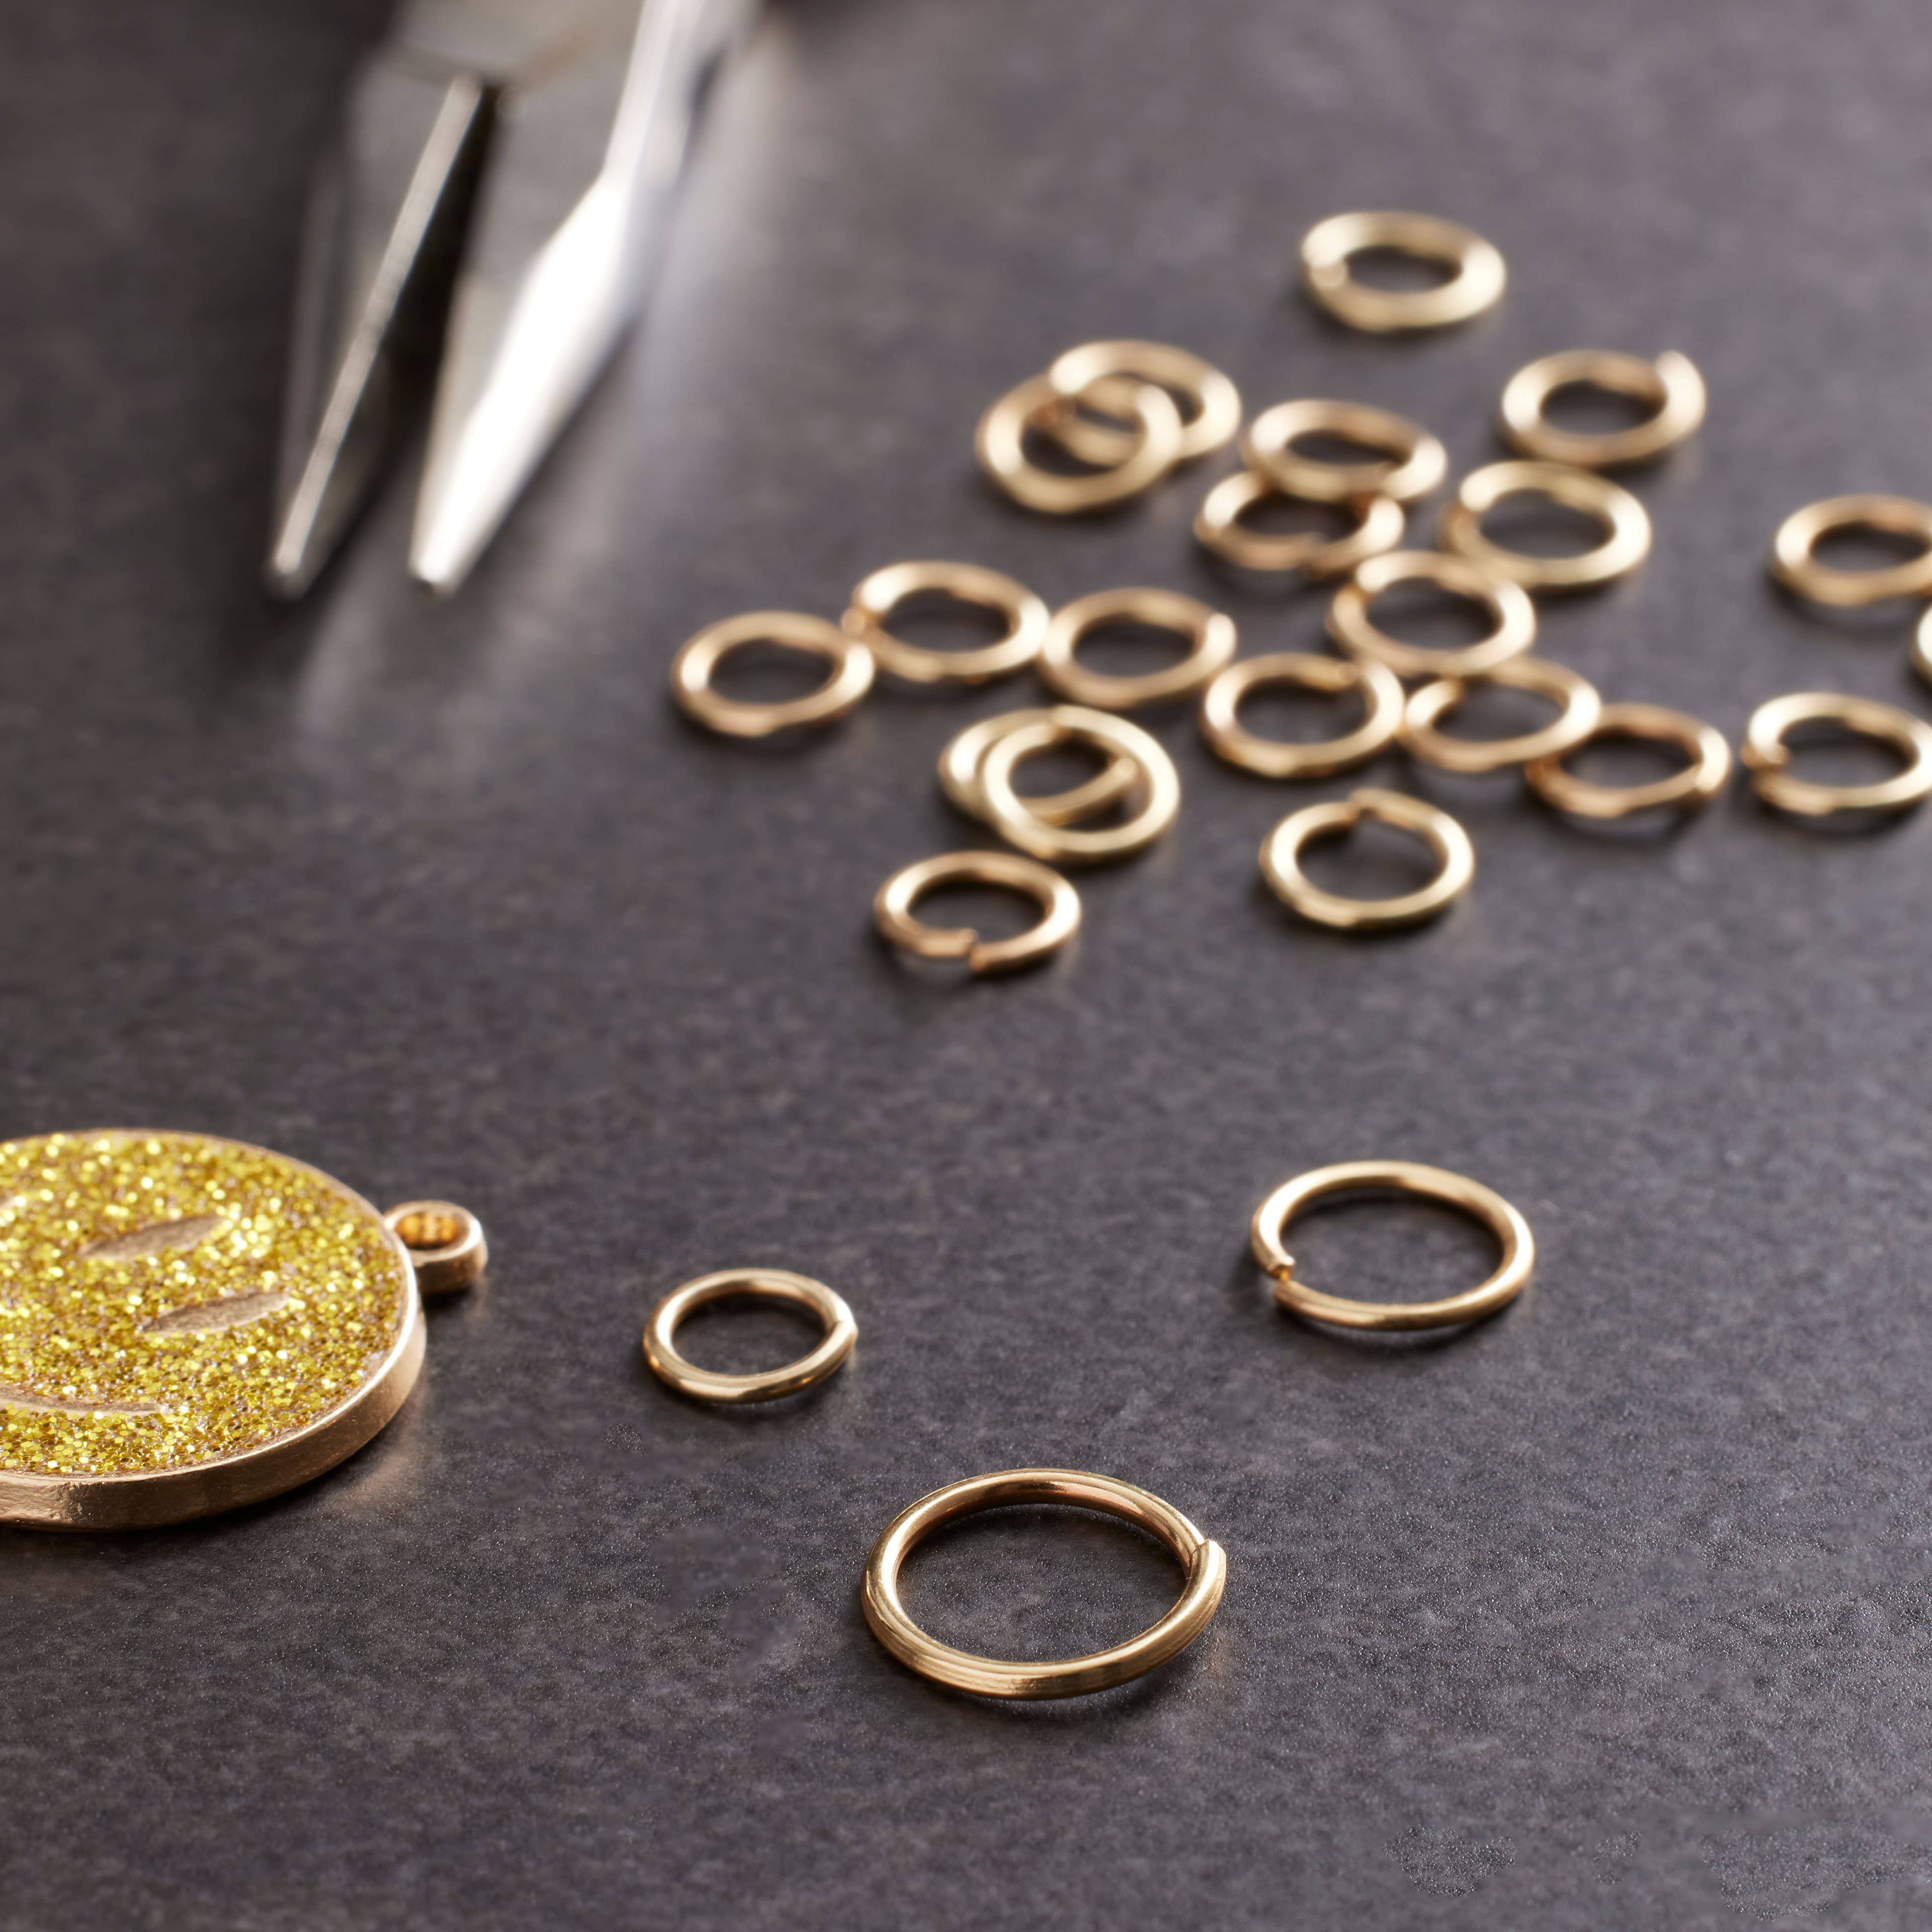 Gold Jump Rings by Creatology&#x2122;